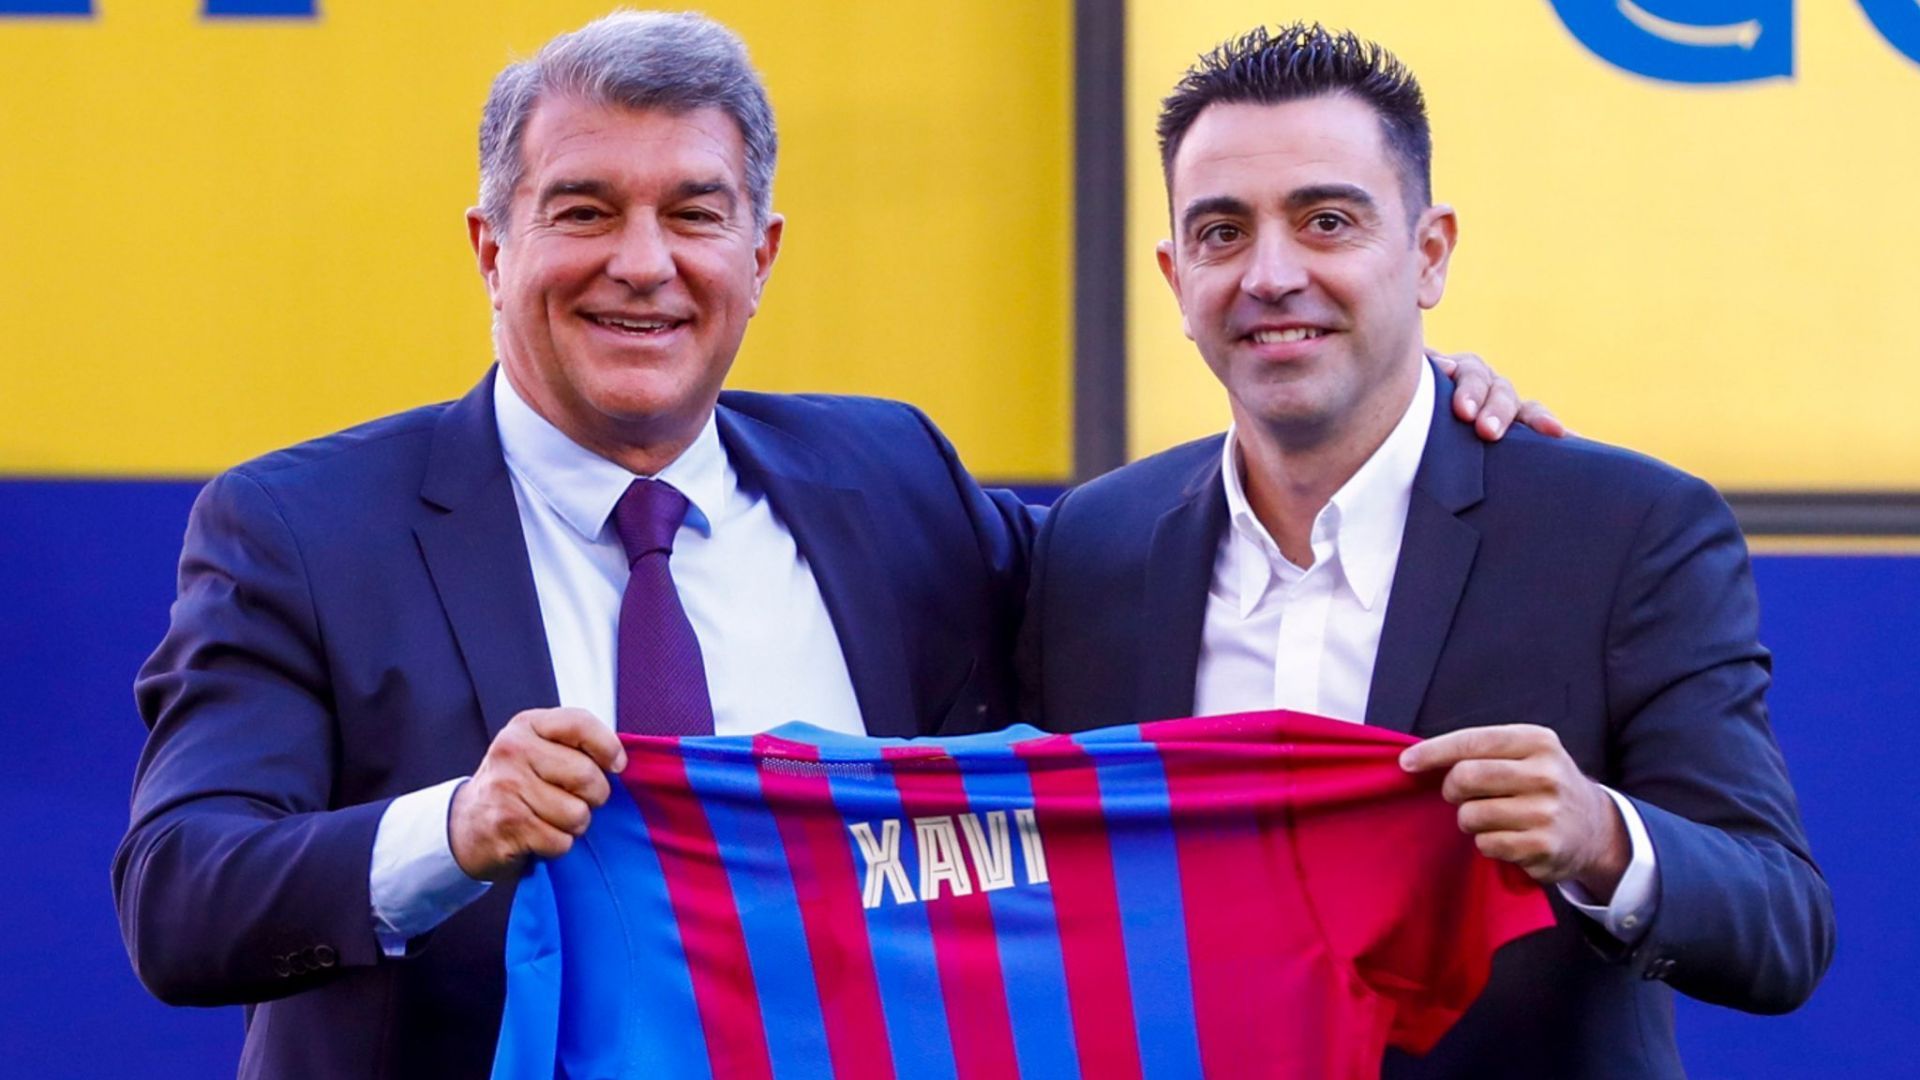 Xavi has revitalised the Barcelona squad since his arrival last year.